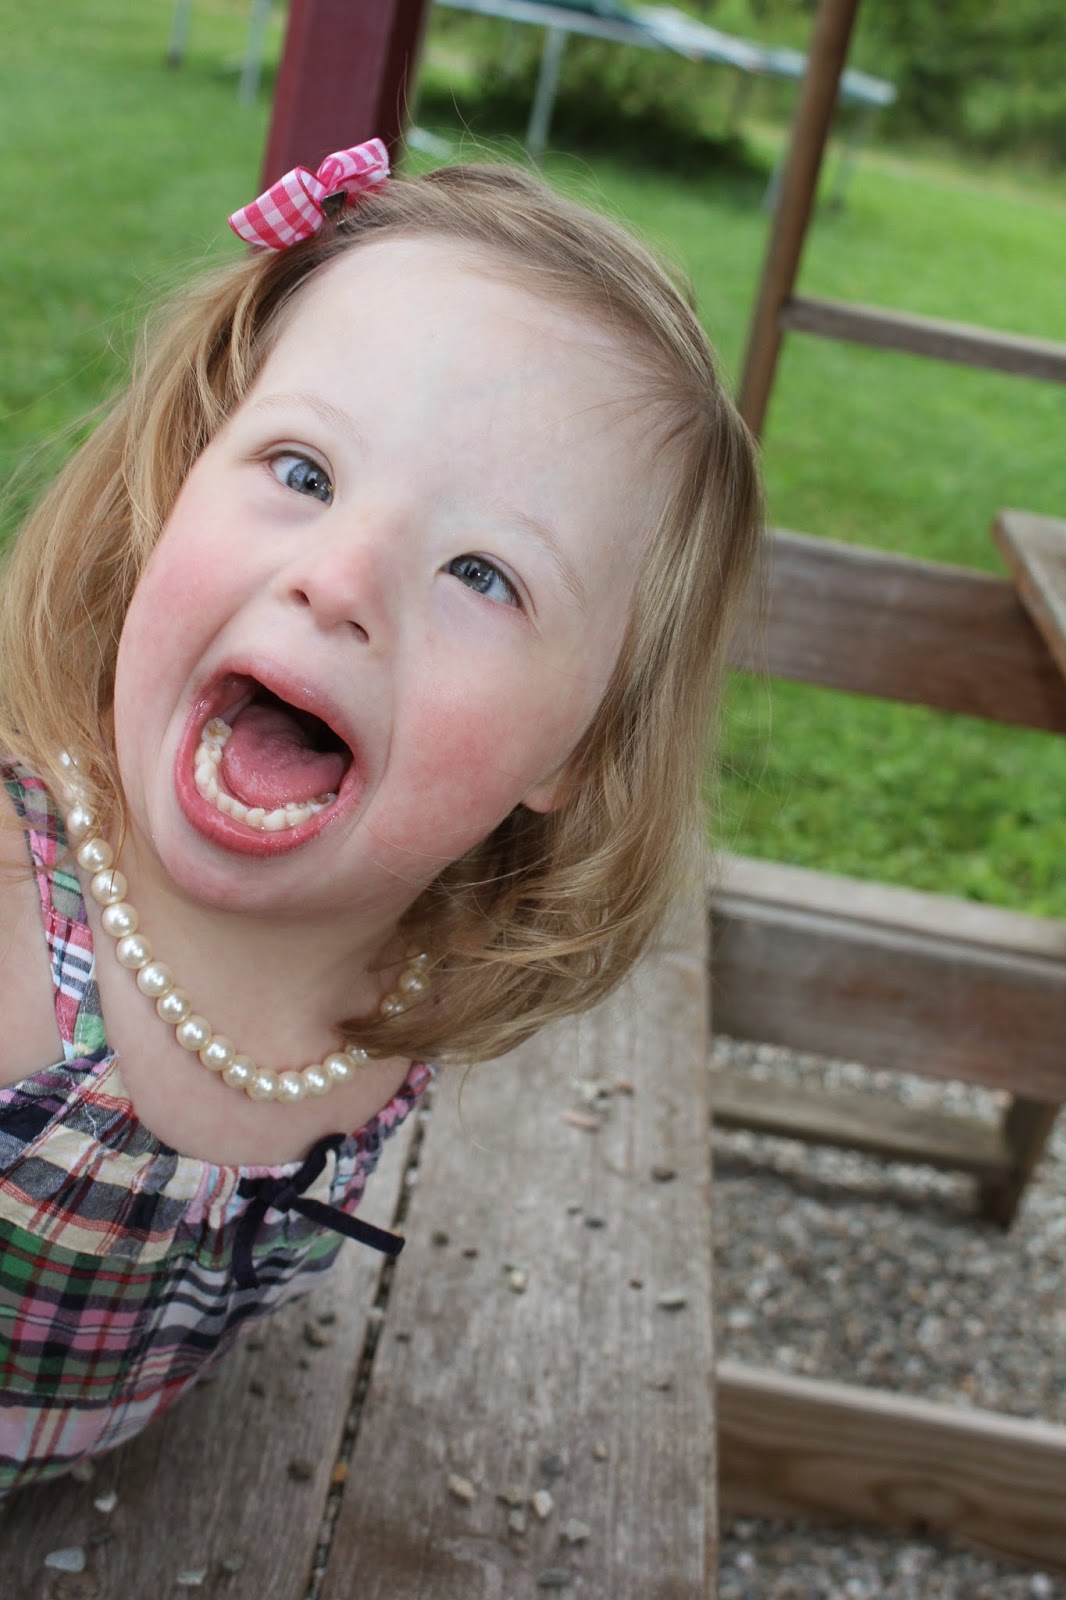 I Won't Let My Daughter With Down Syndrome Be Defined By A 'List